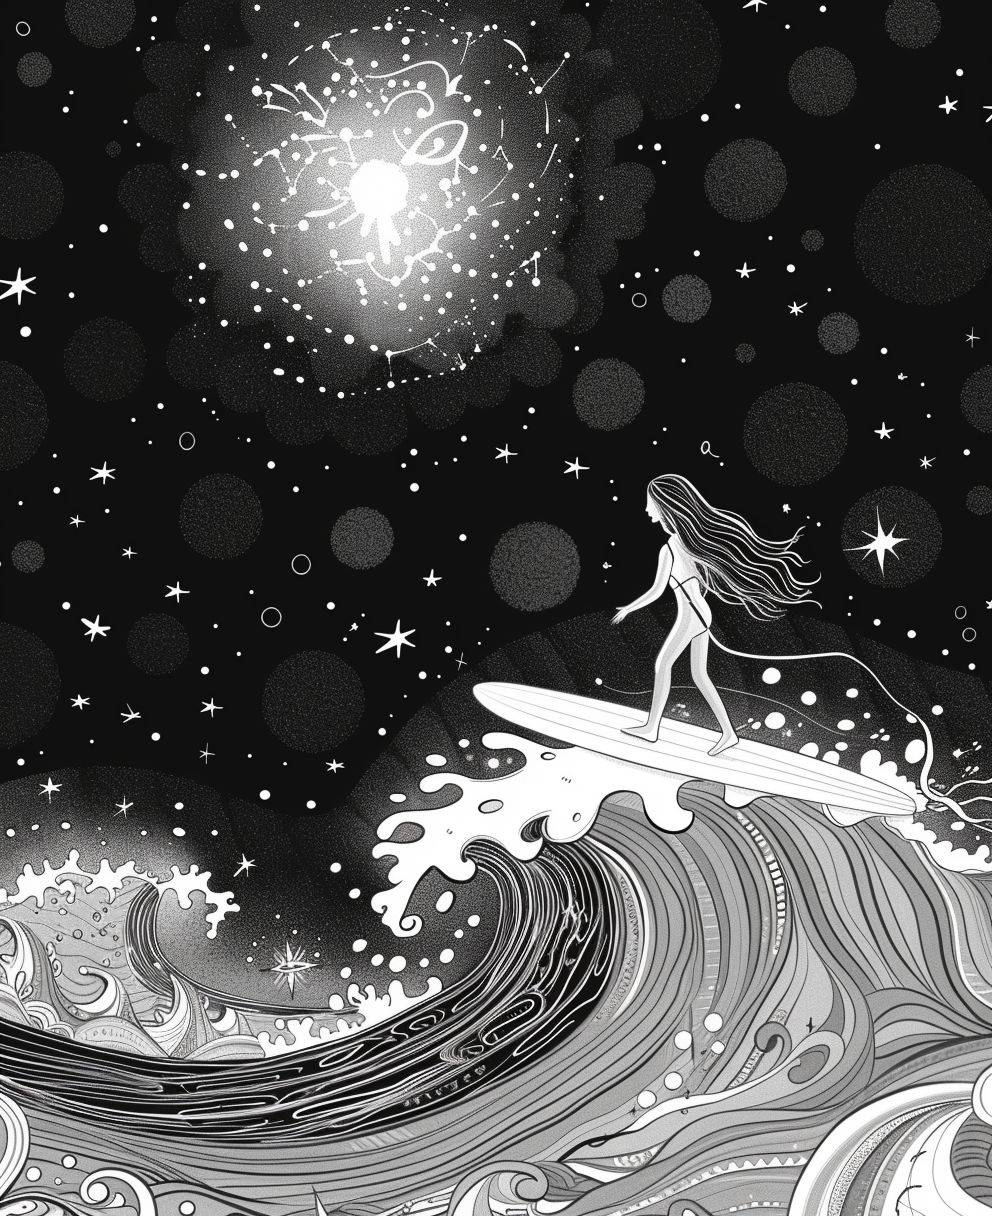 Illustrate a Girl on a surfboard surfing some surreal waves, stars shining bright in the background, cartoon style, thick lines, low detail, no shading, no colours